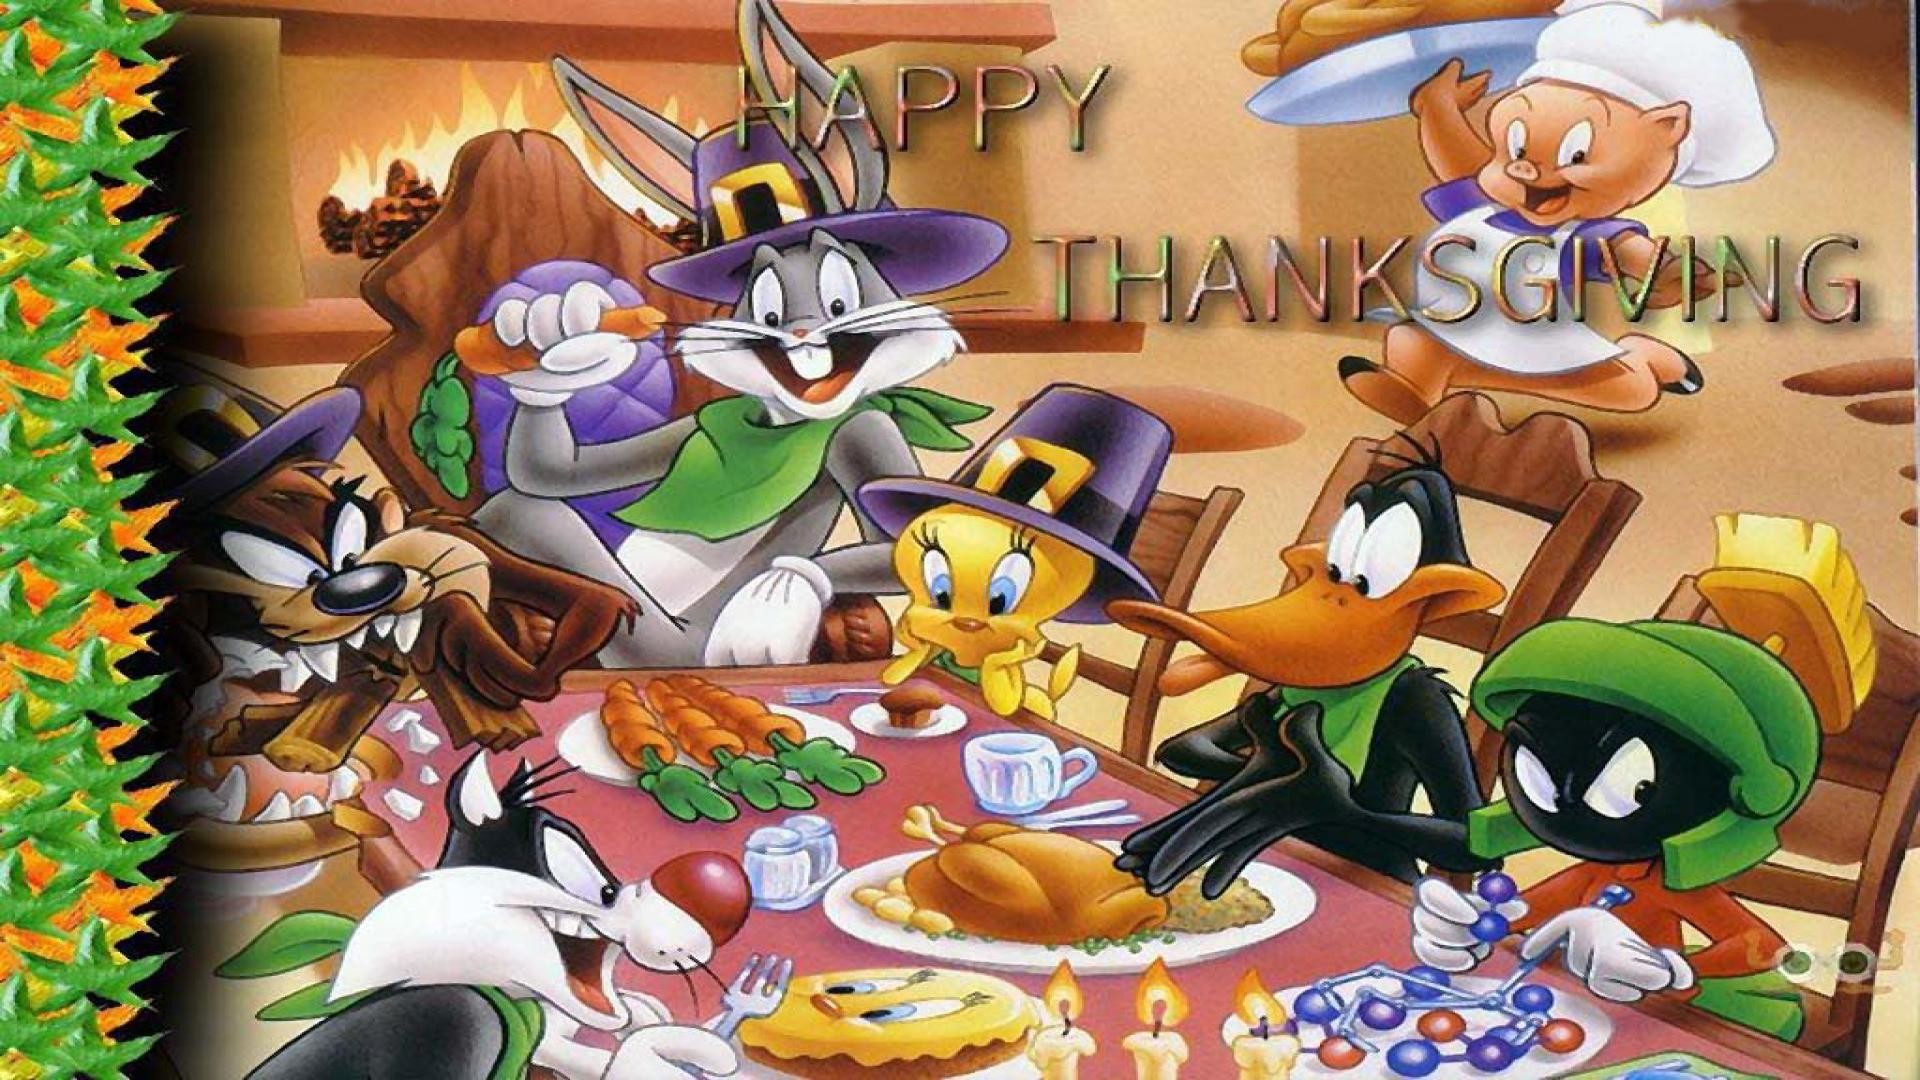 christian thanksgiving background images